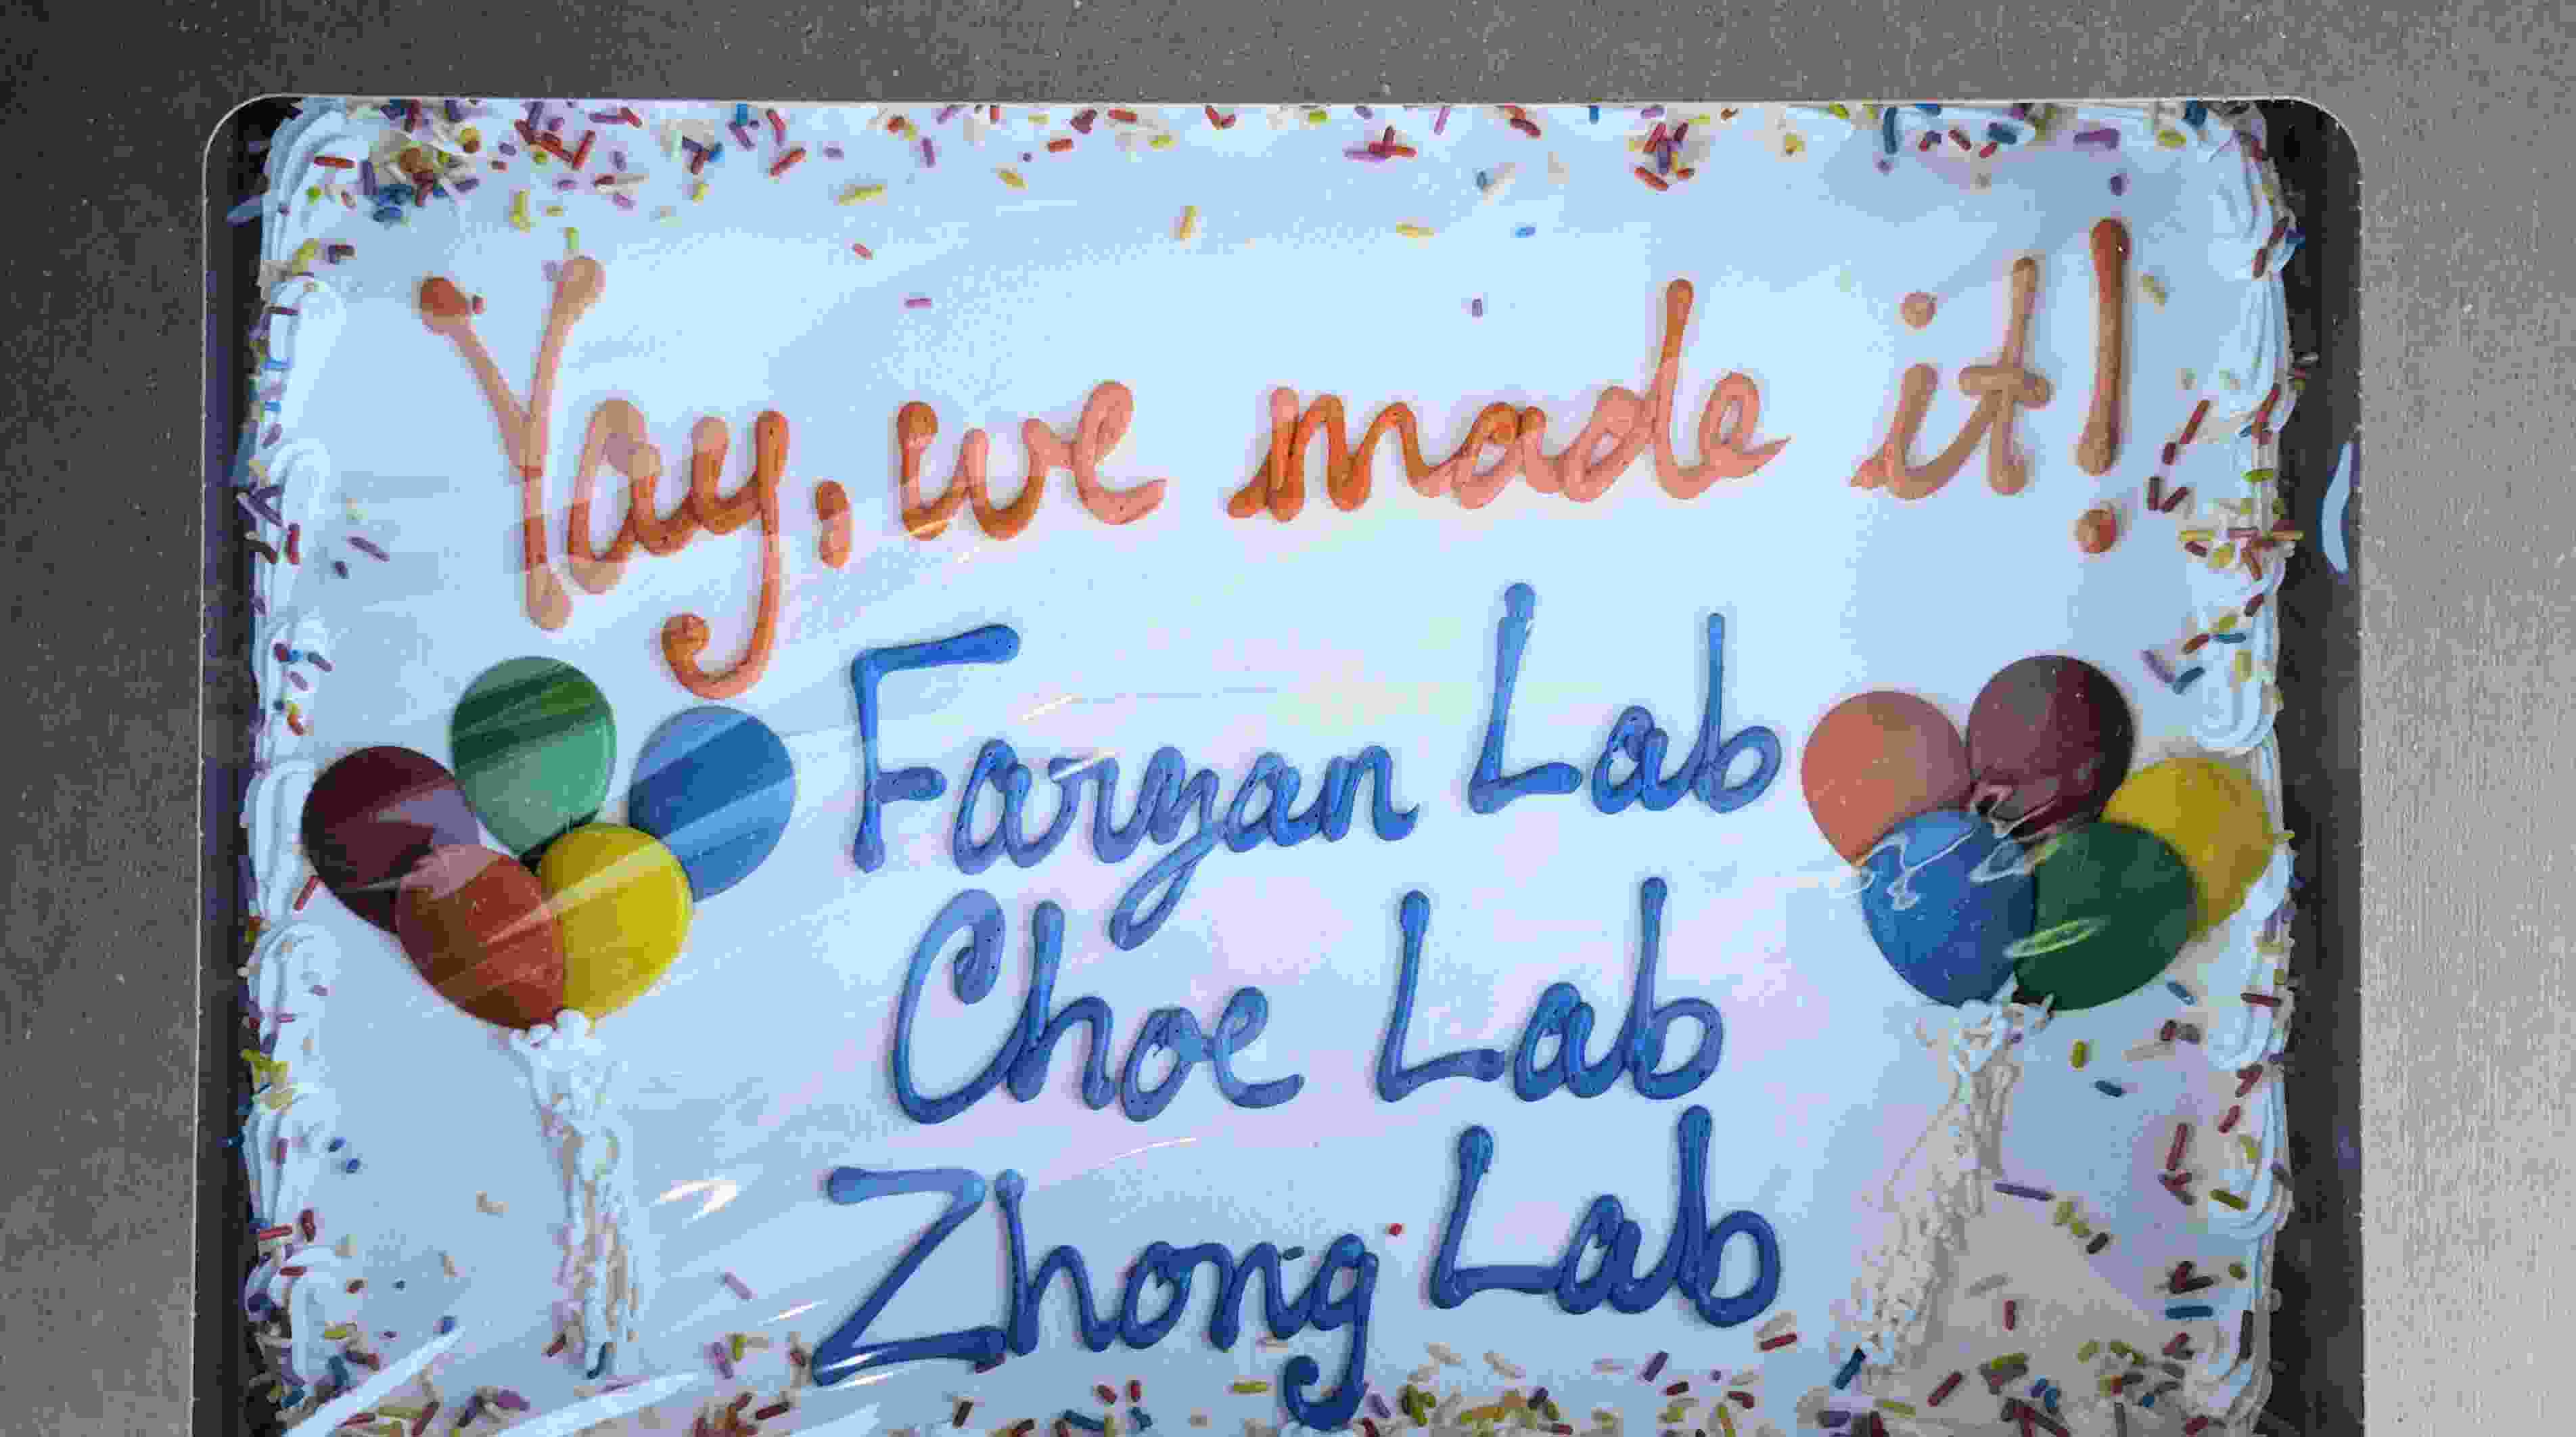 A big cake with the words "Yay, we made it. Farzan Lab, Choe Lab, Zhong Lab" on it.